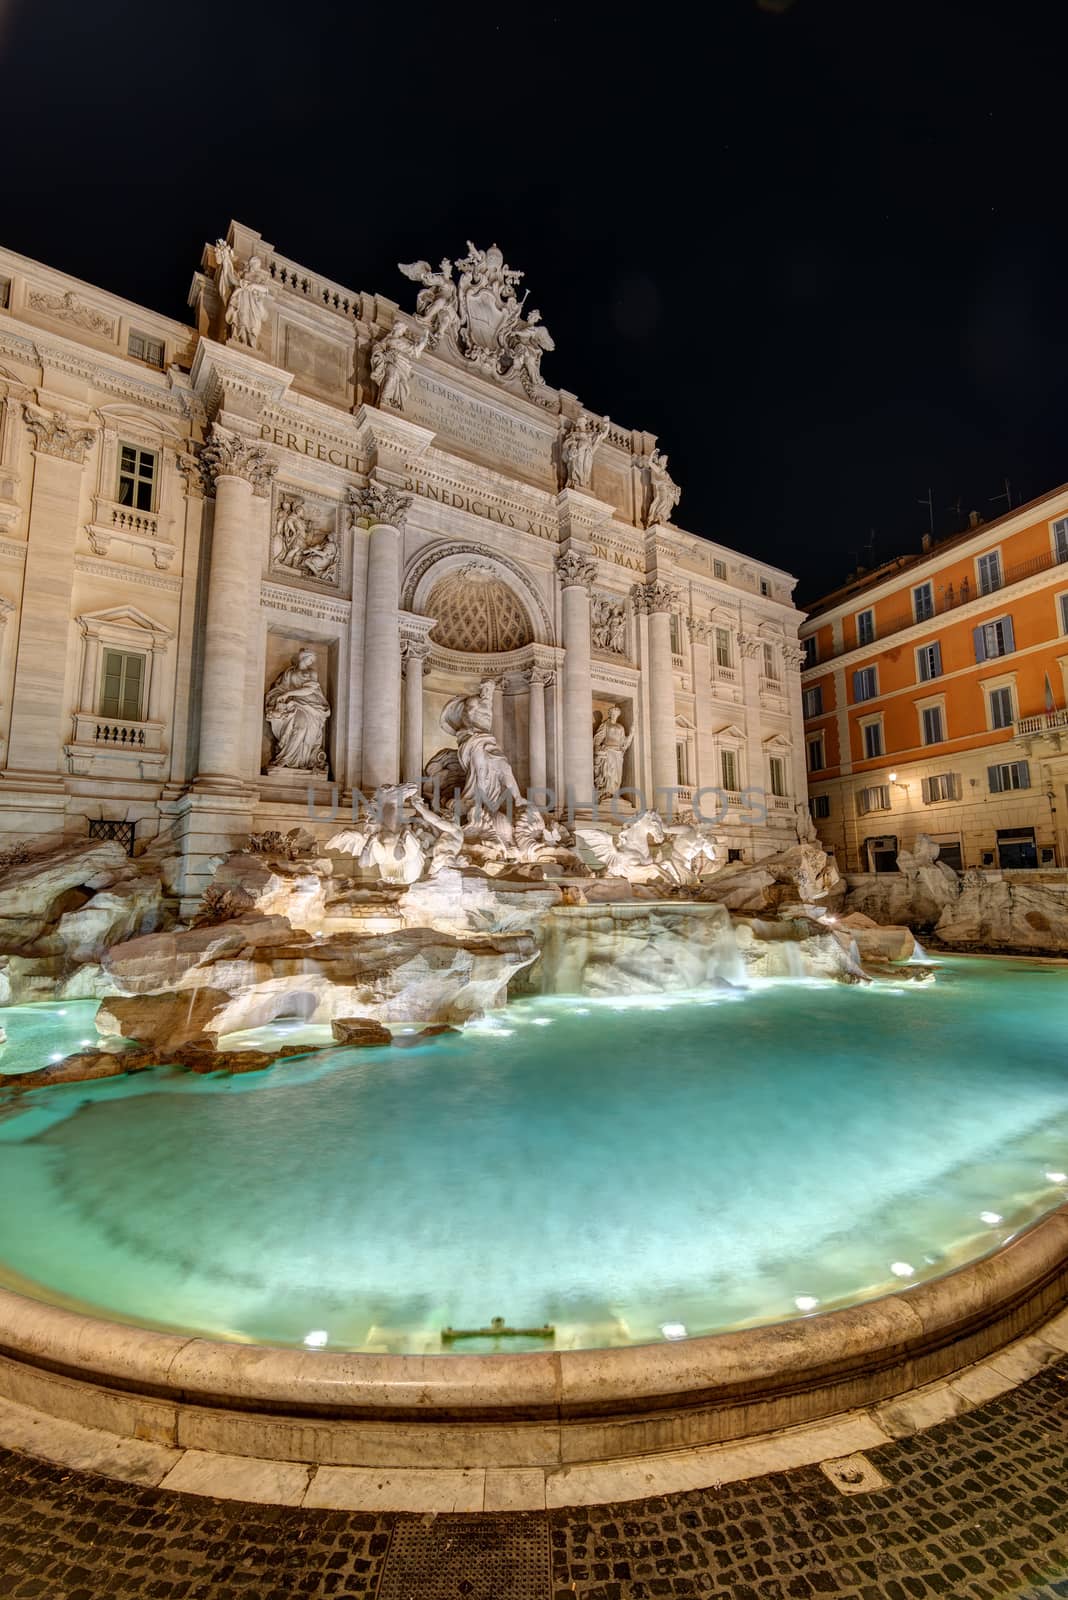 The famous Fontana di Trevi in Rome at night with no people